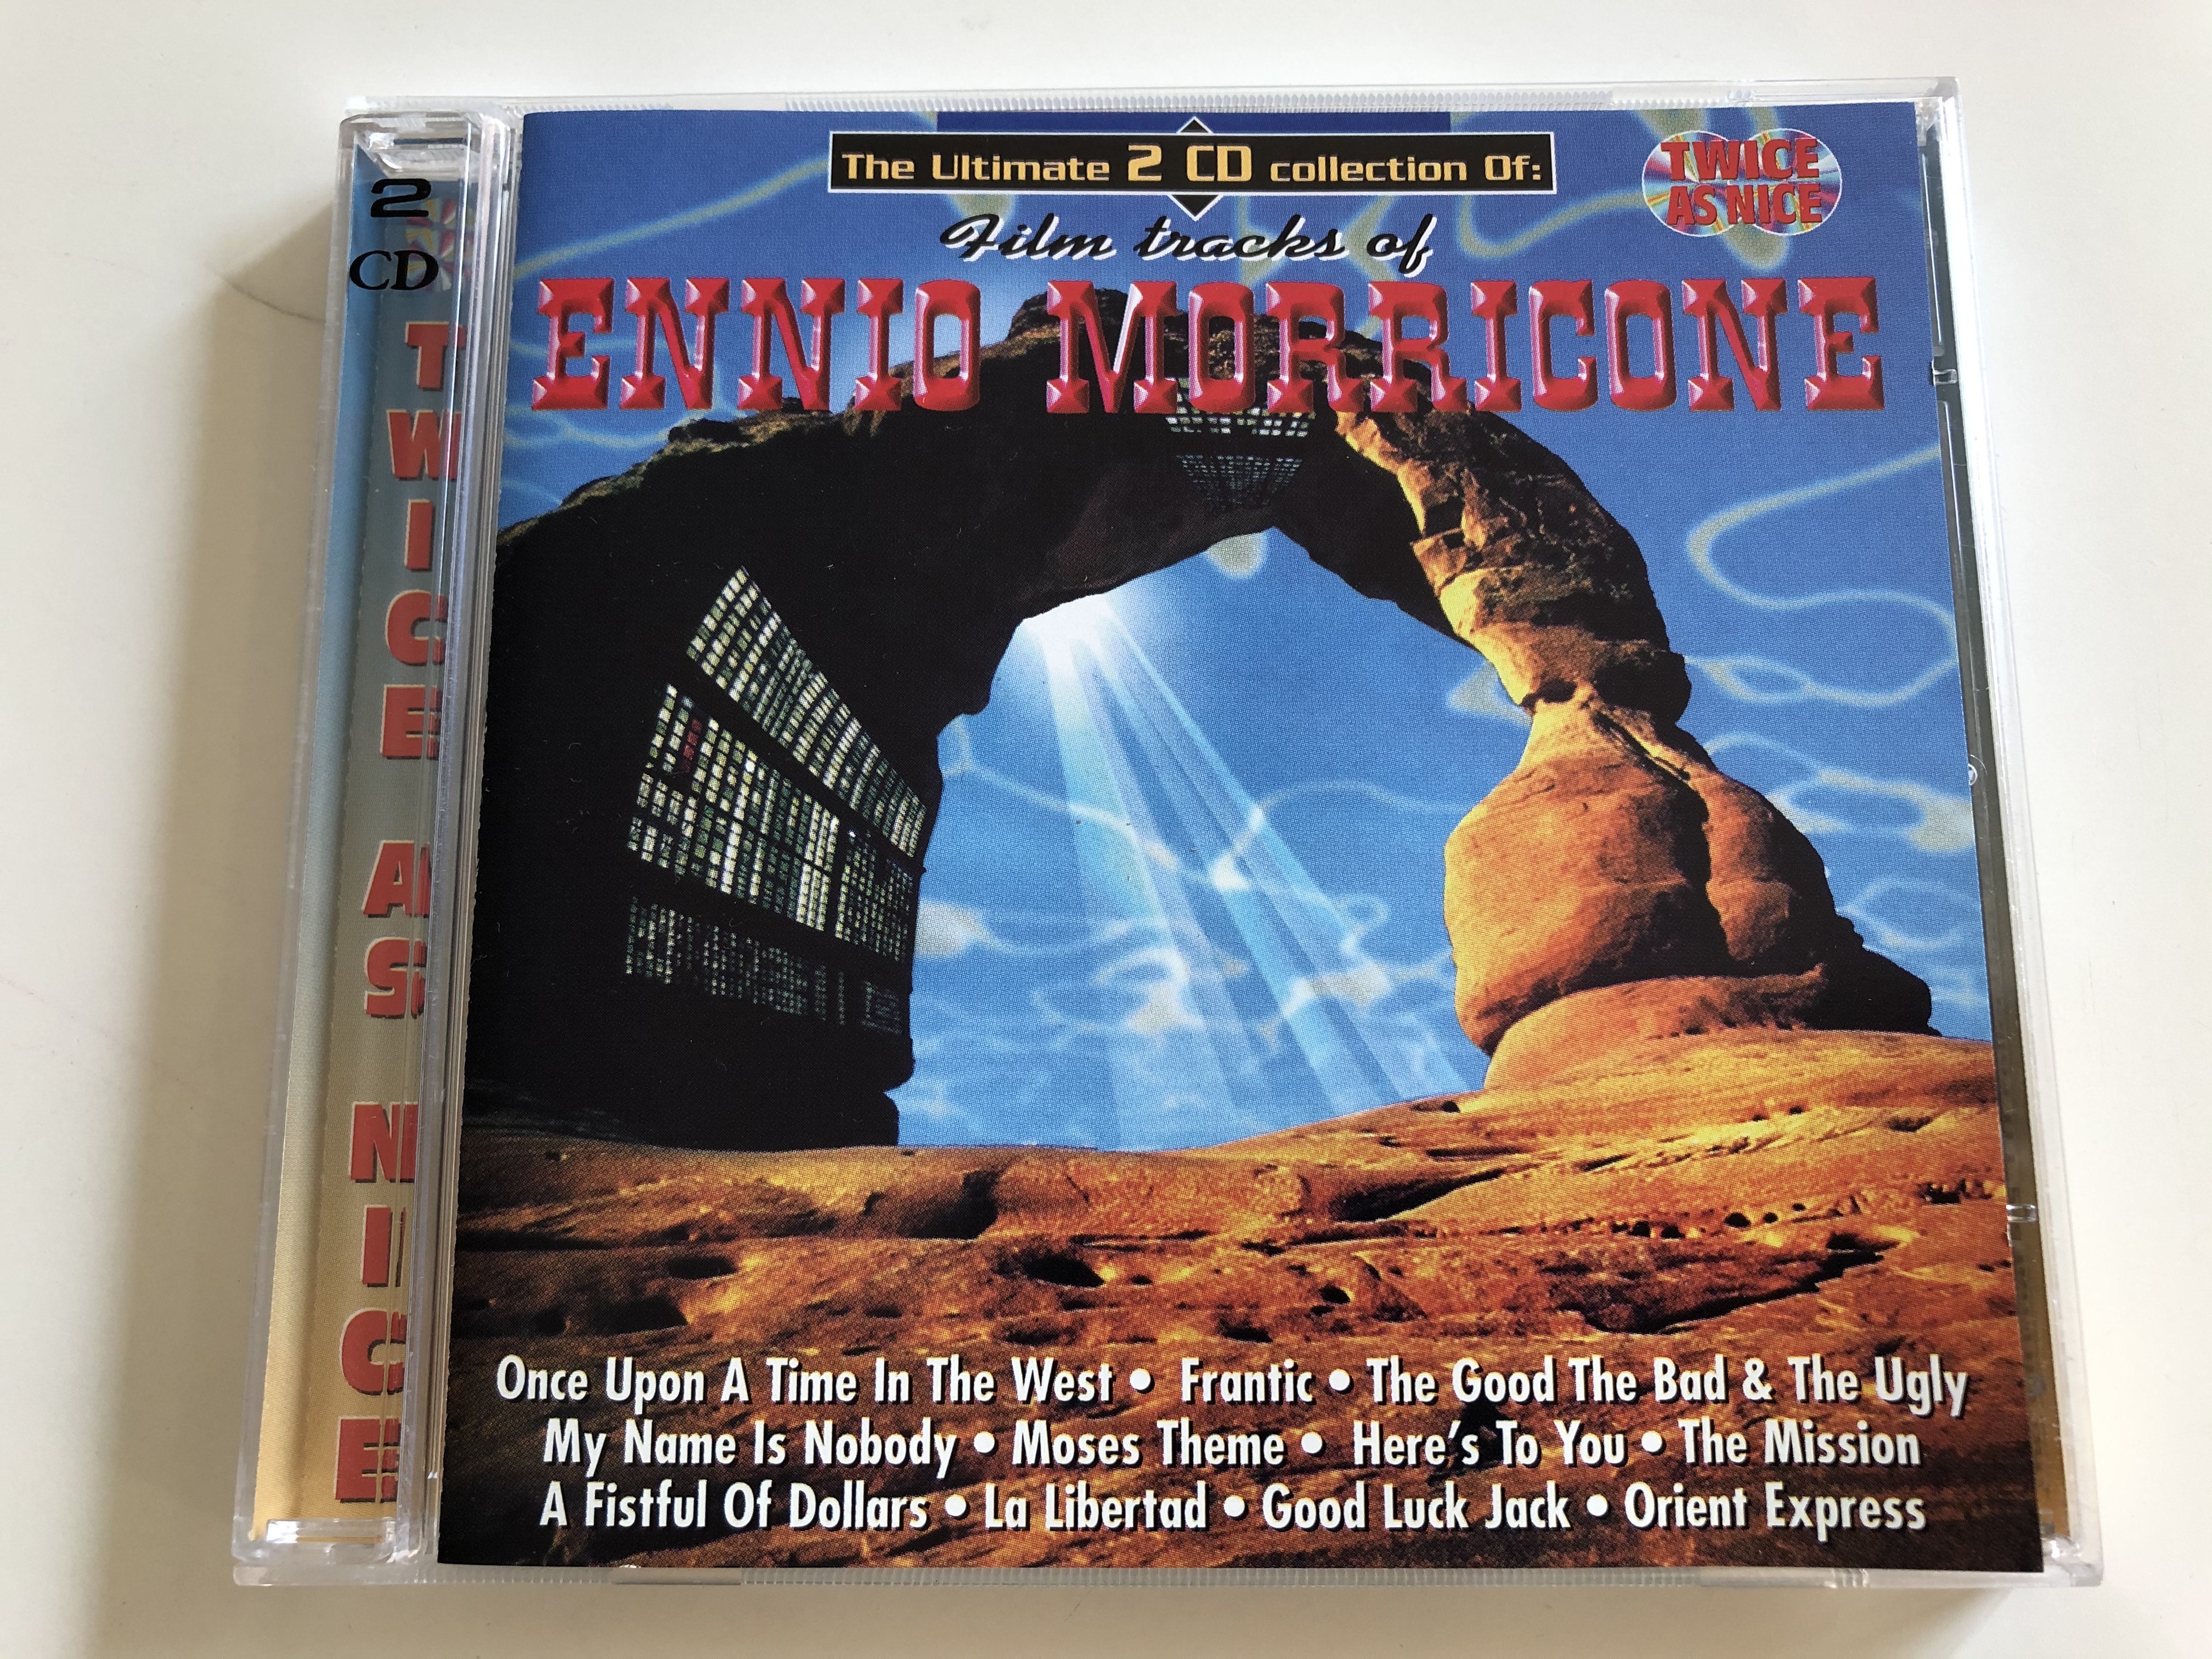 film-tracks-of-ennio-morricone-ones-upon-a-time-in-the-west-frantic-the-good-the-bad-the-ugly-my-name-is-nobody-moses-theme-here-s-to-you-the-mission-a-fistful-of-doilars-digimode-ent-1-.jpg